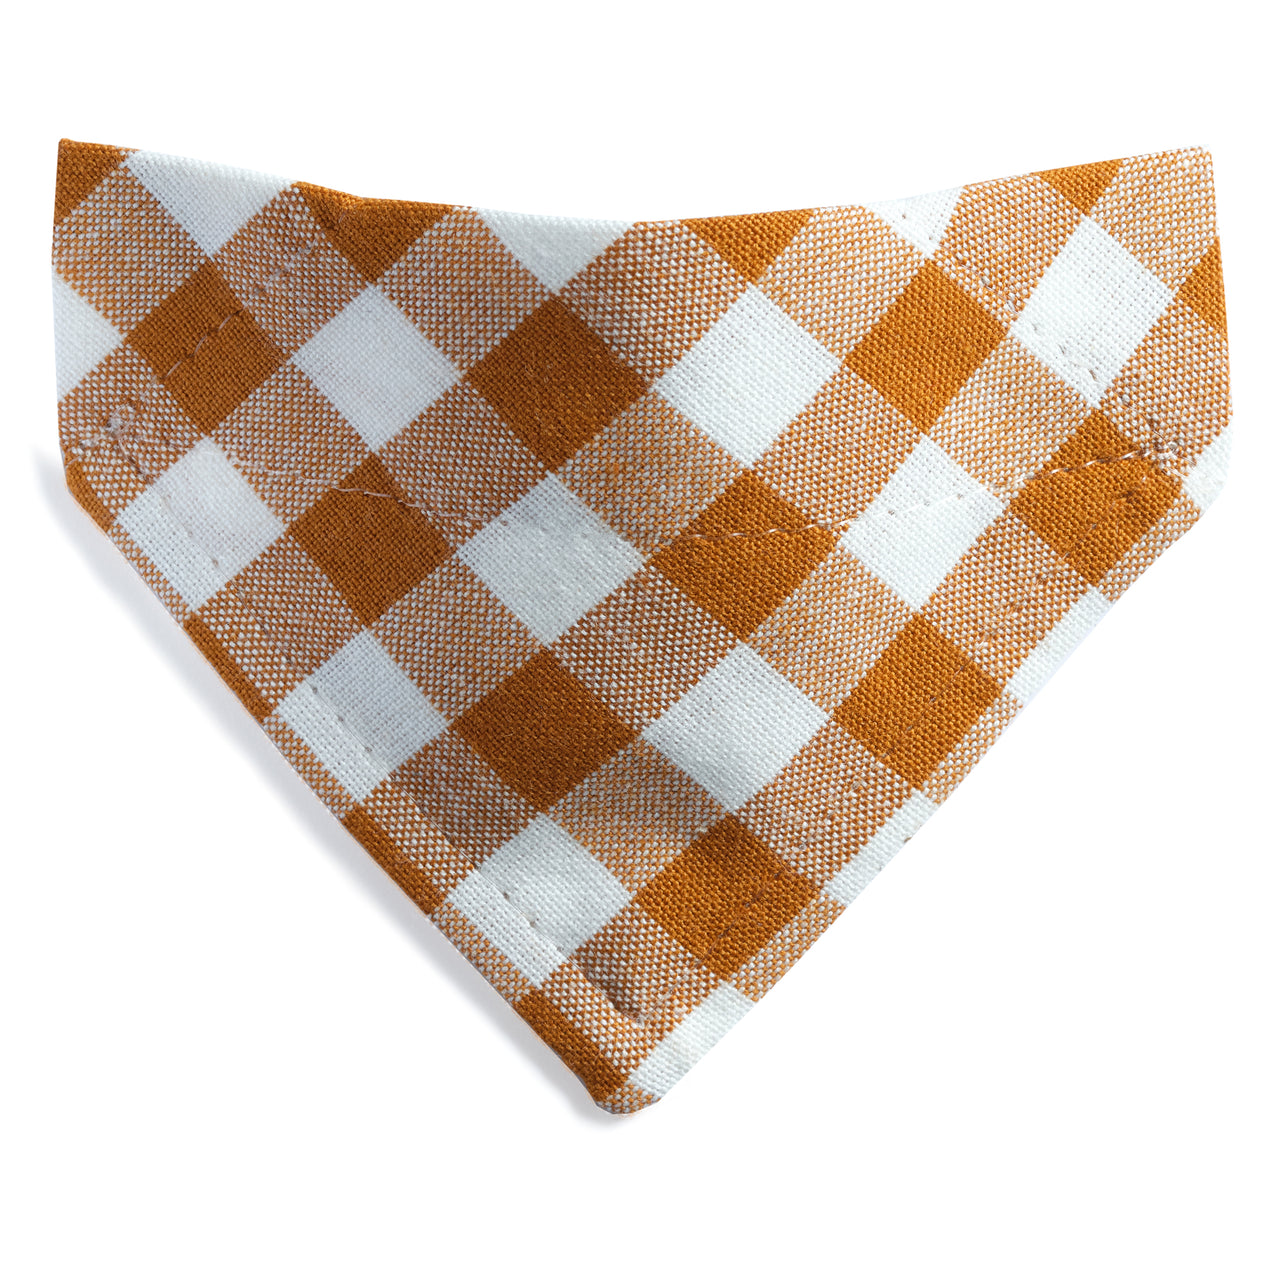 The All Checked Out - Cat / Small Dog Bandana